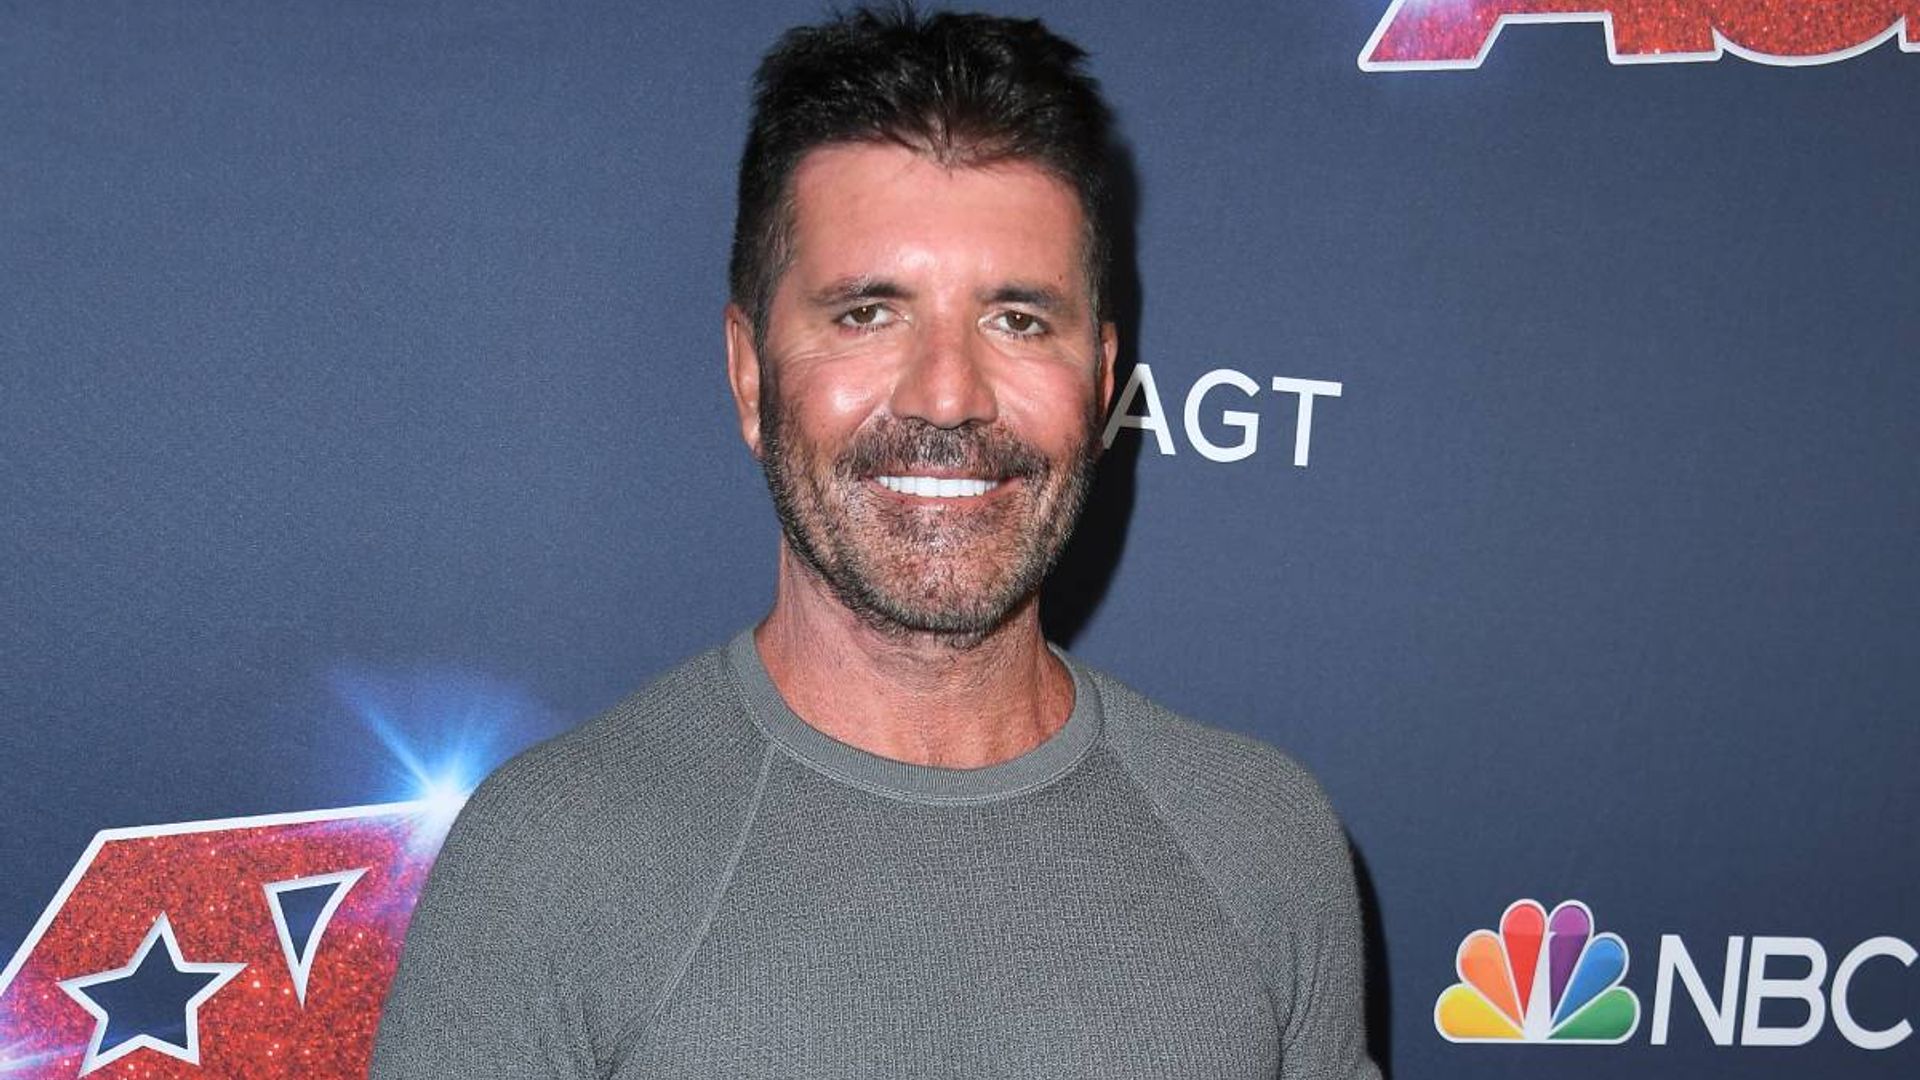 simon cowell weight loss comment